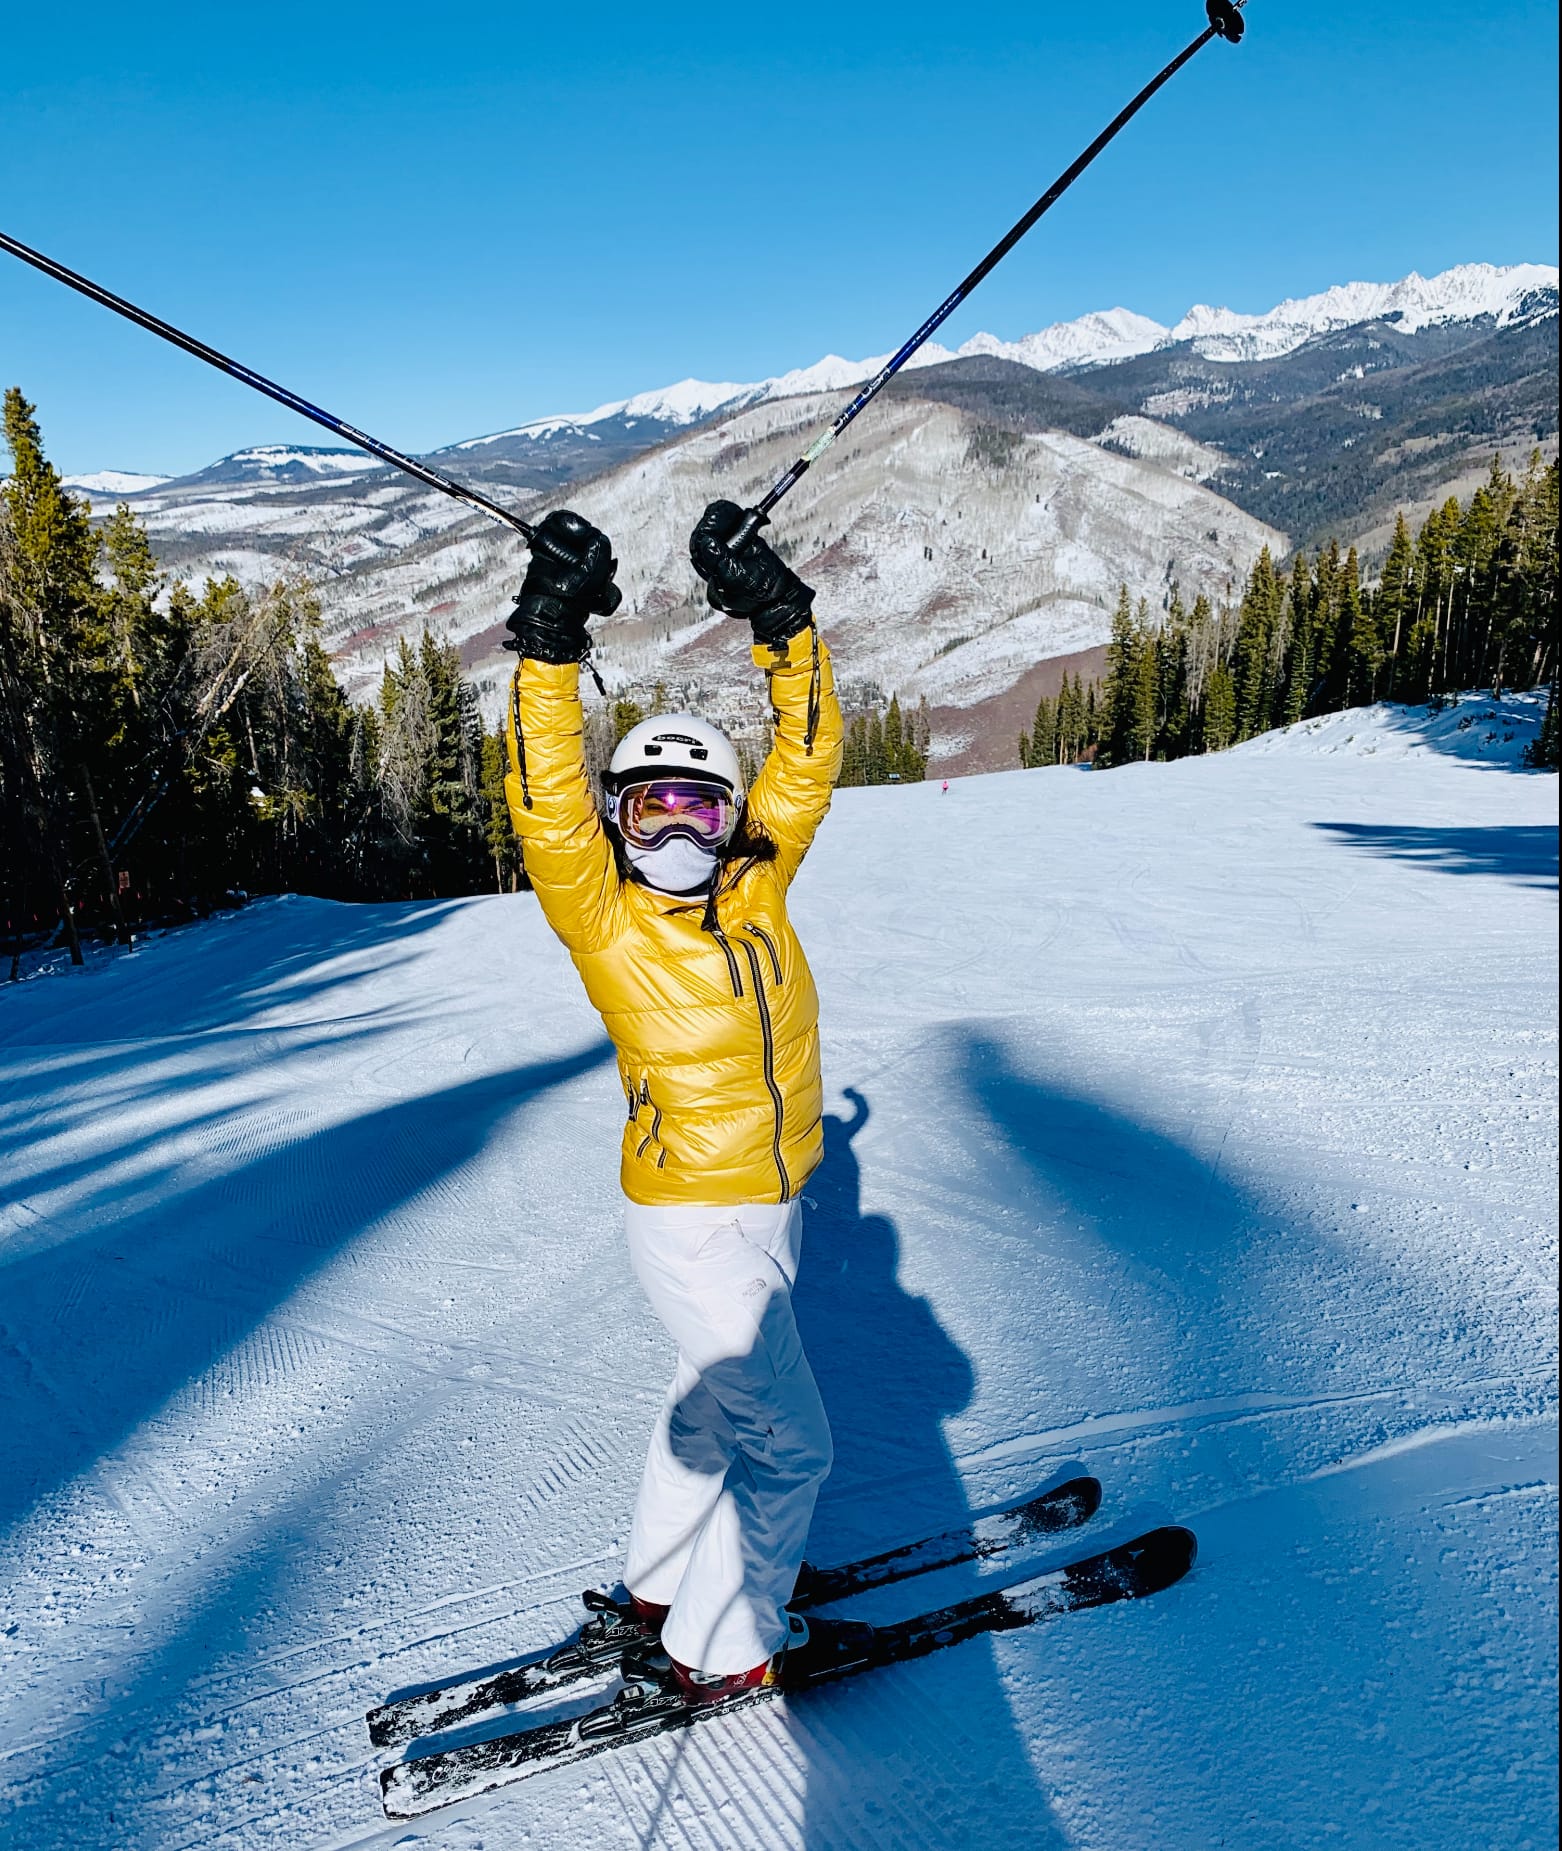 The back bowls at Vail…Does it get any better than that on a sunshine, blue sky, Colorado day?